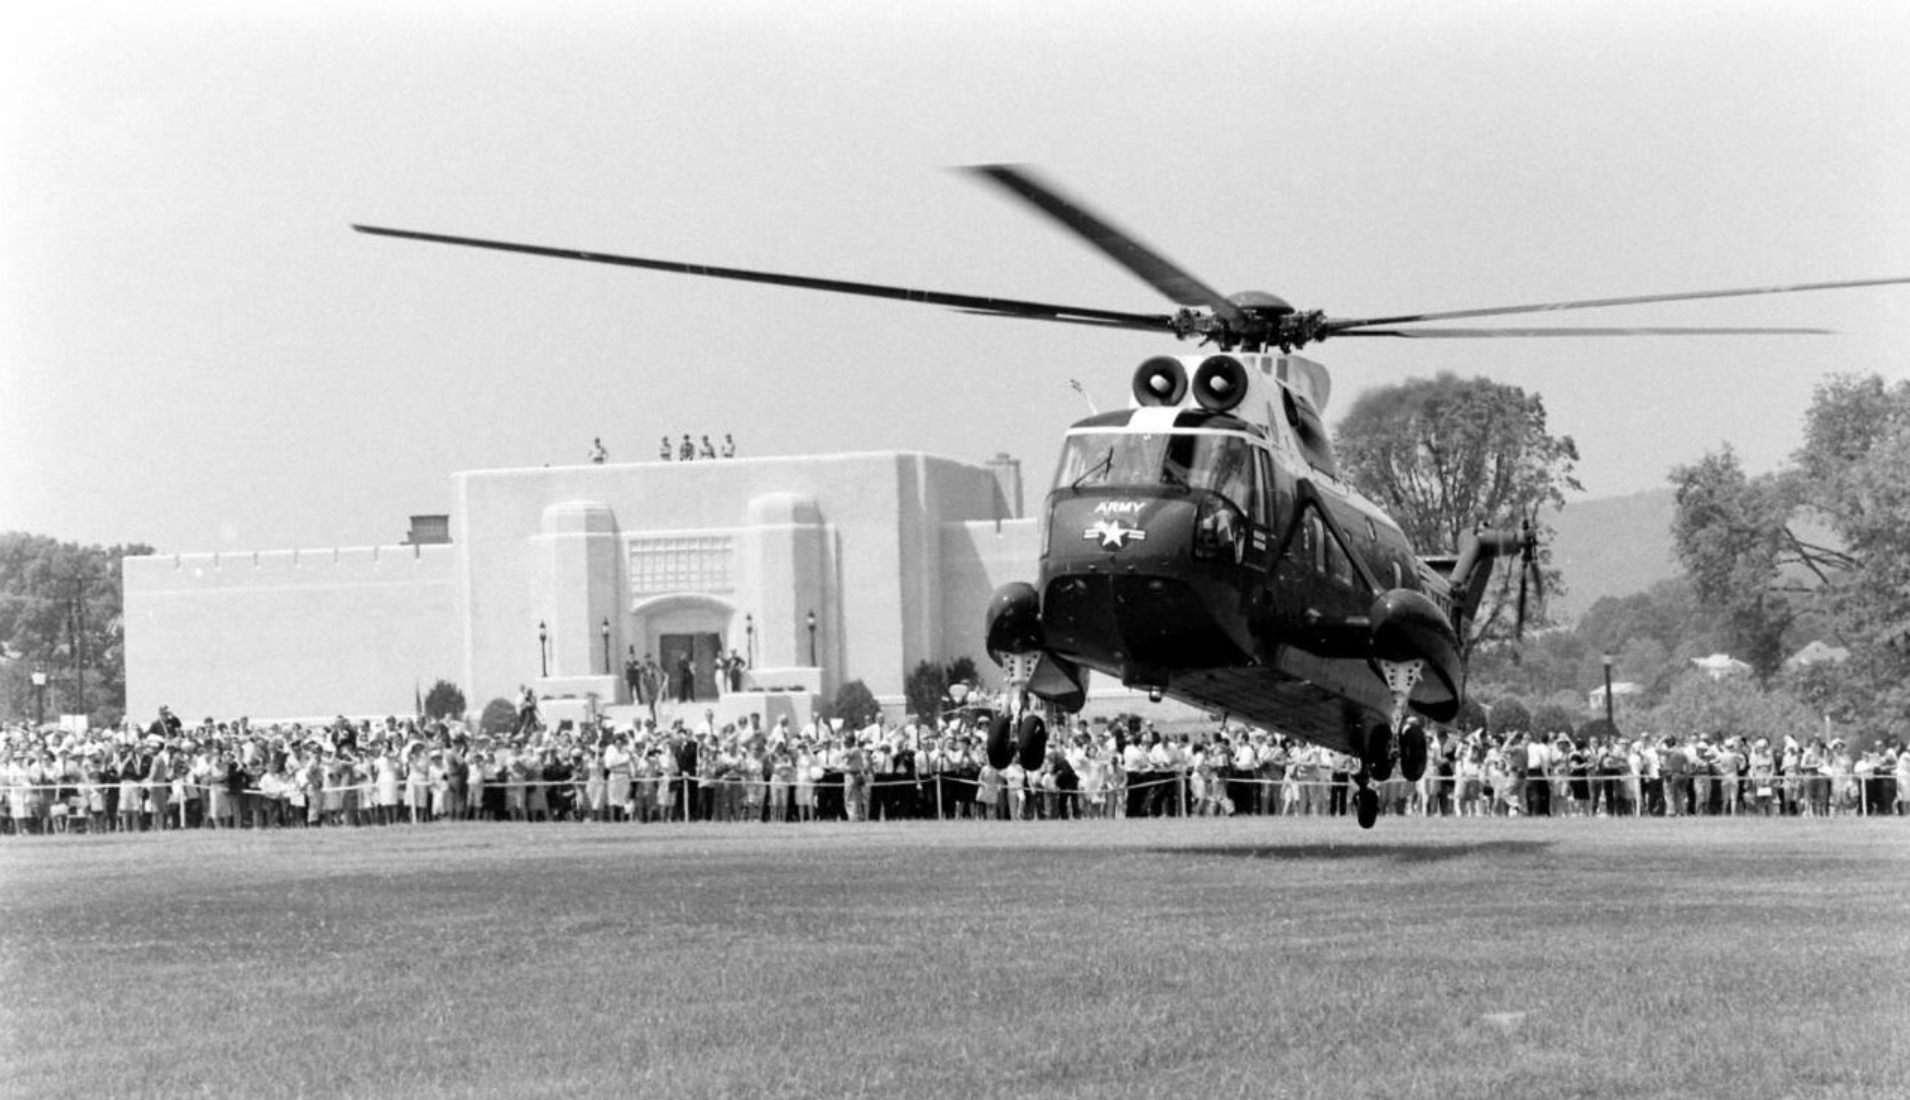 A helicopter brings a guest to the Dedication, photo by Francis Miller, LIFE Magazine.